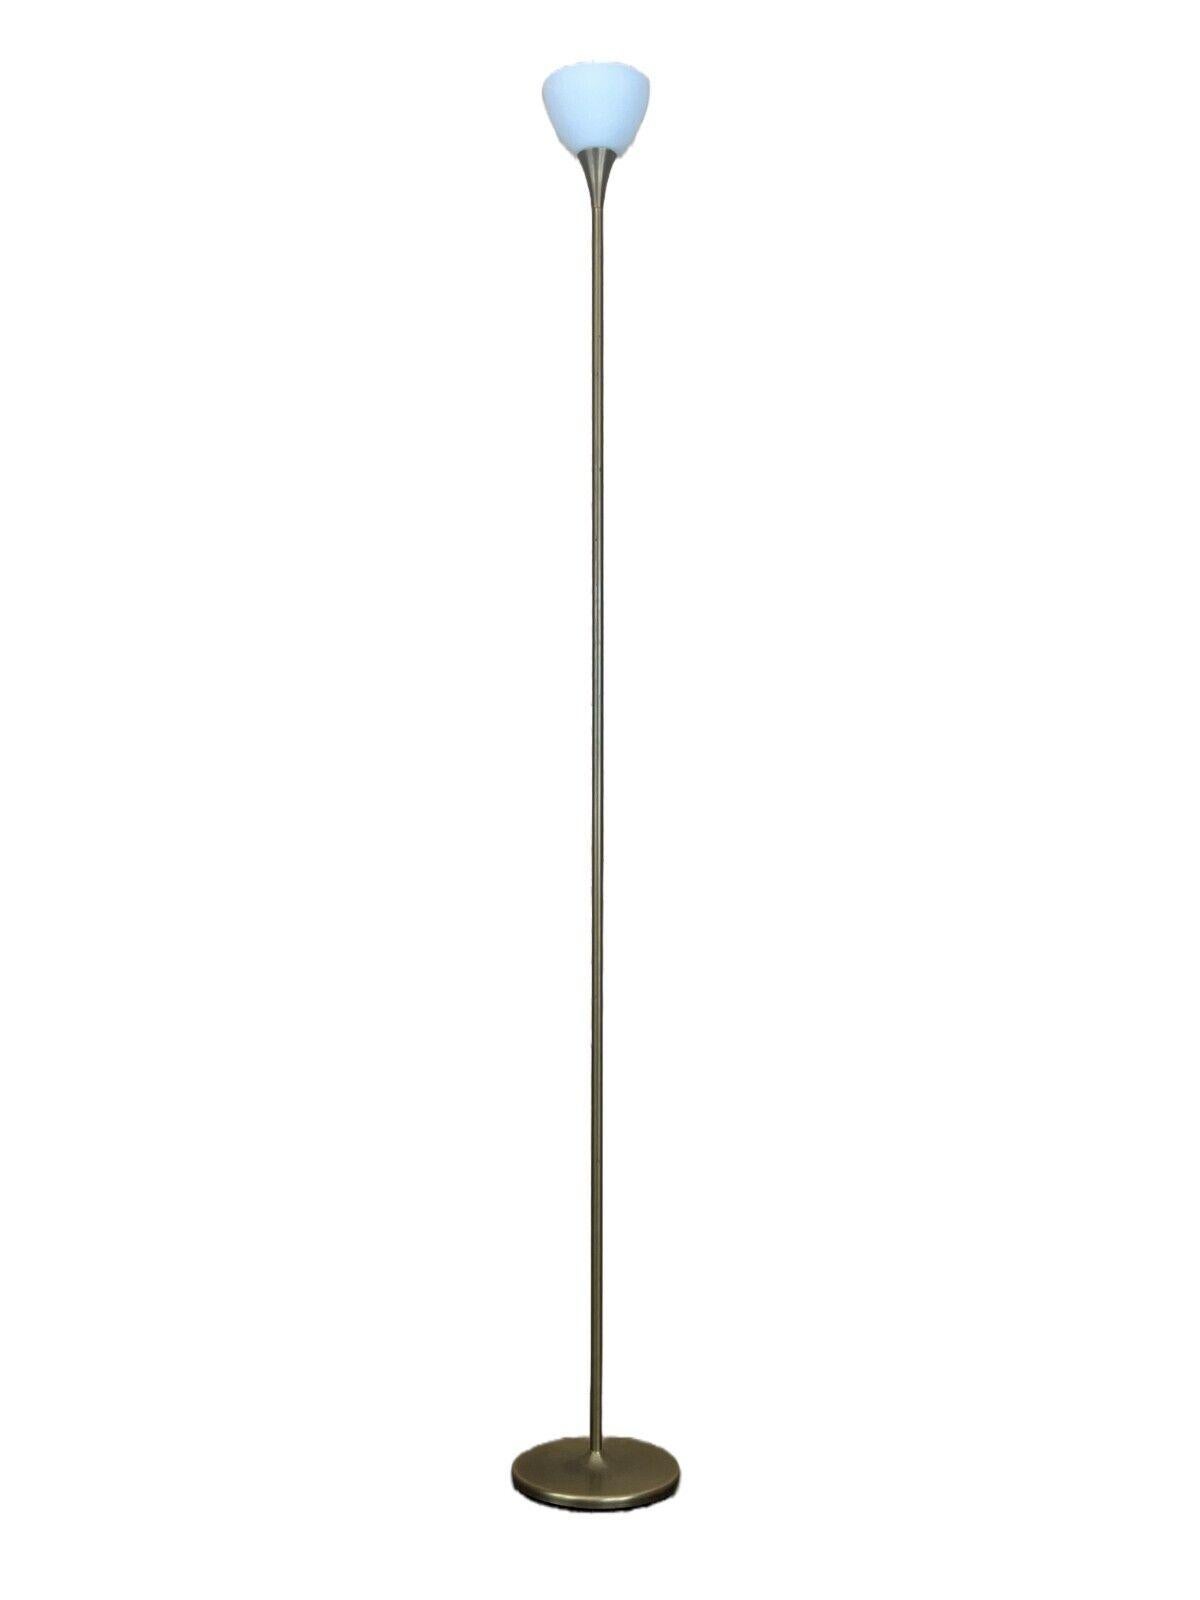 60s 70s floor lamp Hillebrand Space Age Design brass & glass

Object: floor lamp

Manufacturer: Hillebrand

Condition: good

Age: around 1960-1970

Dimensions:

Diameter = 23cm
Height = 191.5cm

Other notes:

The pictures serve as